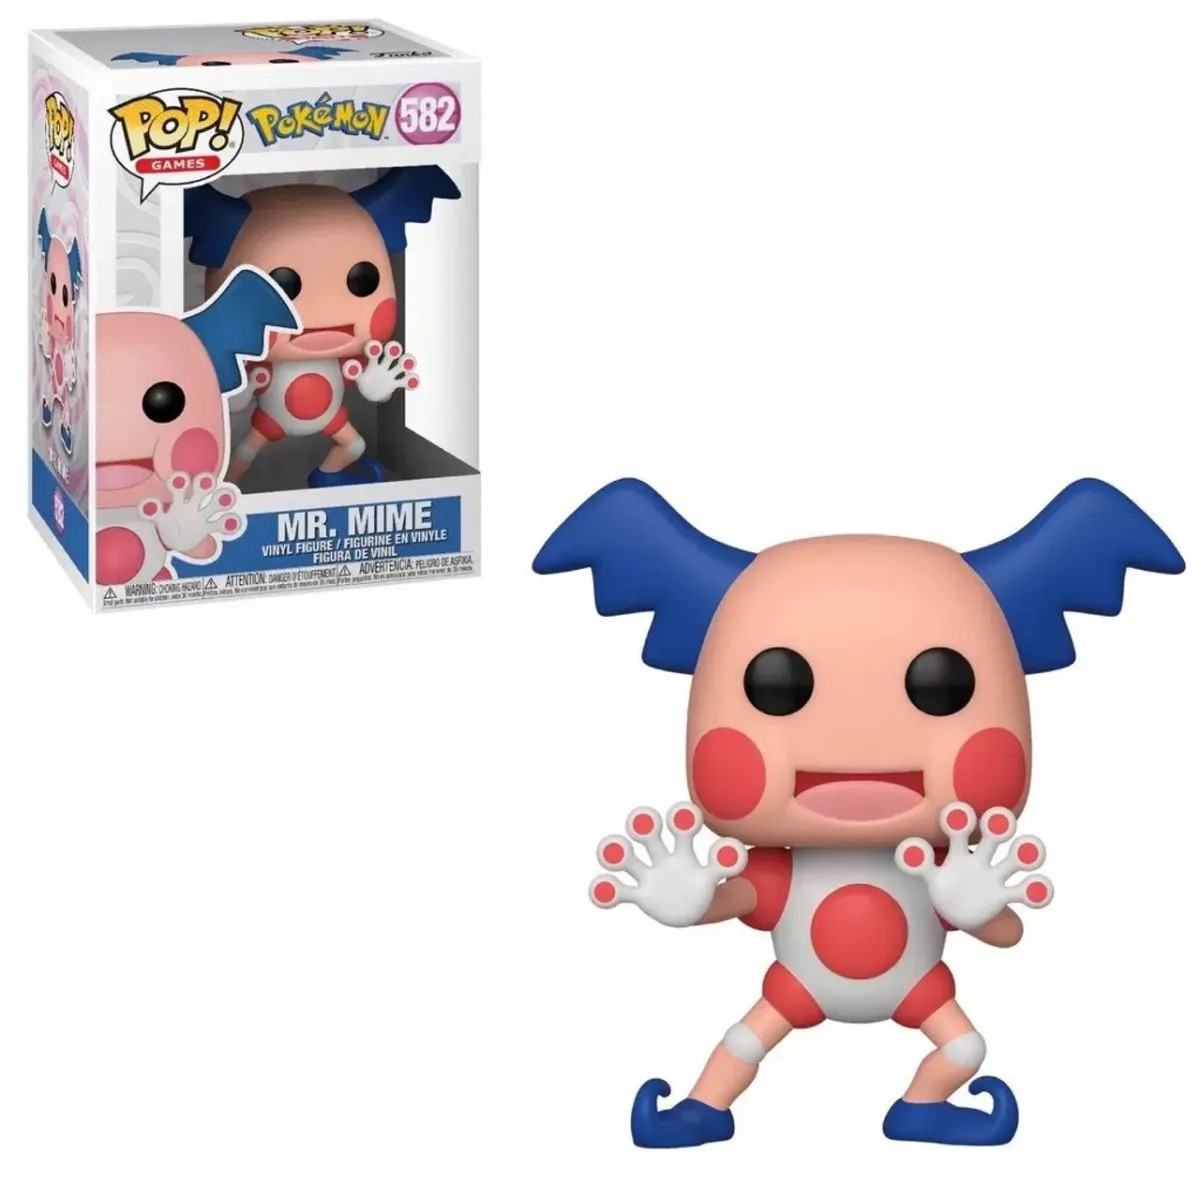 Mr Mime Funko Pop, displayed in box and out of box